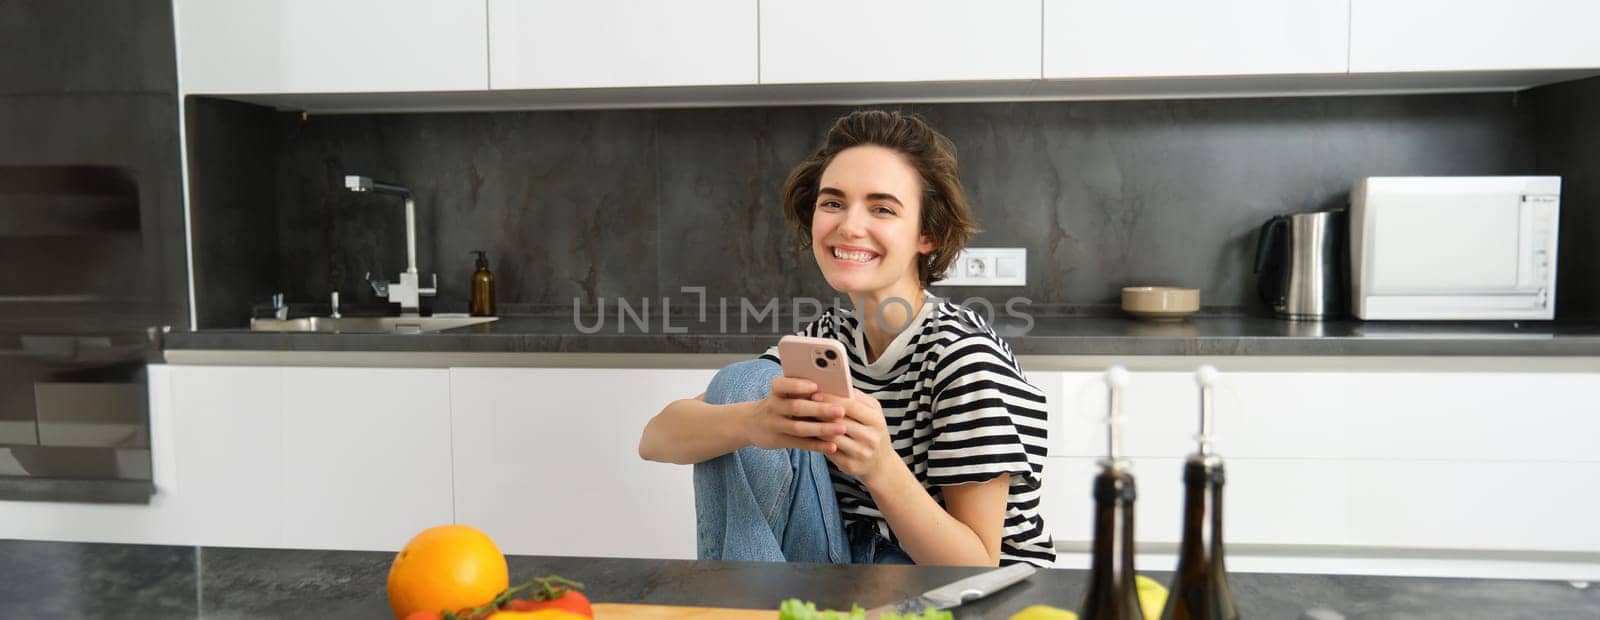 Portrait of young woman searching for cooking recipes online using smartphone, sitting near vegetables, salad ingredients and chopping board, smiling at camera.